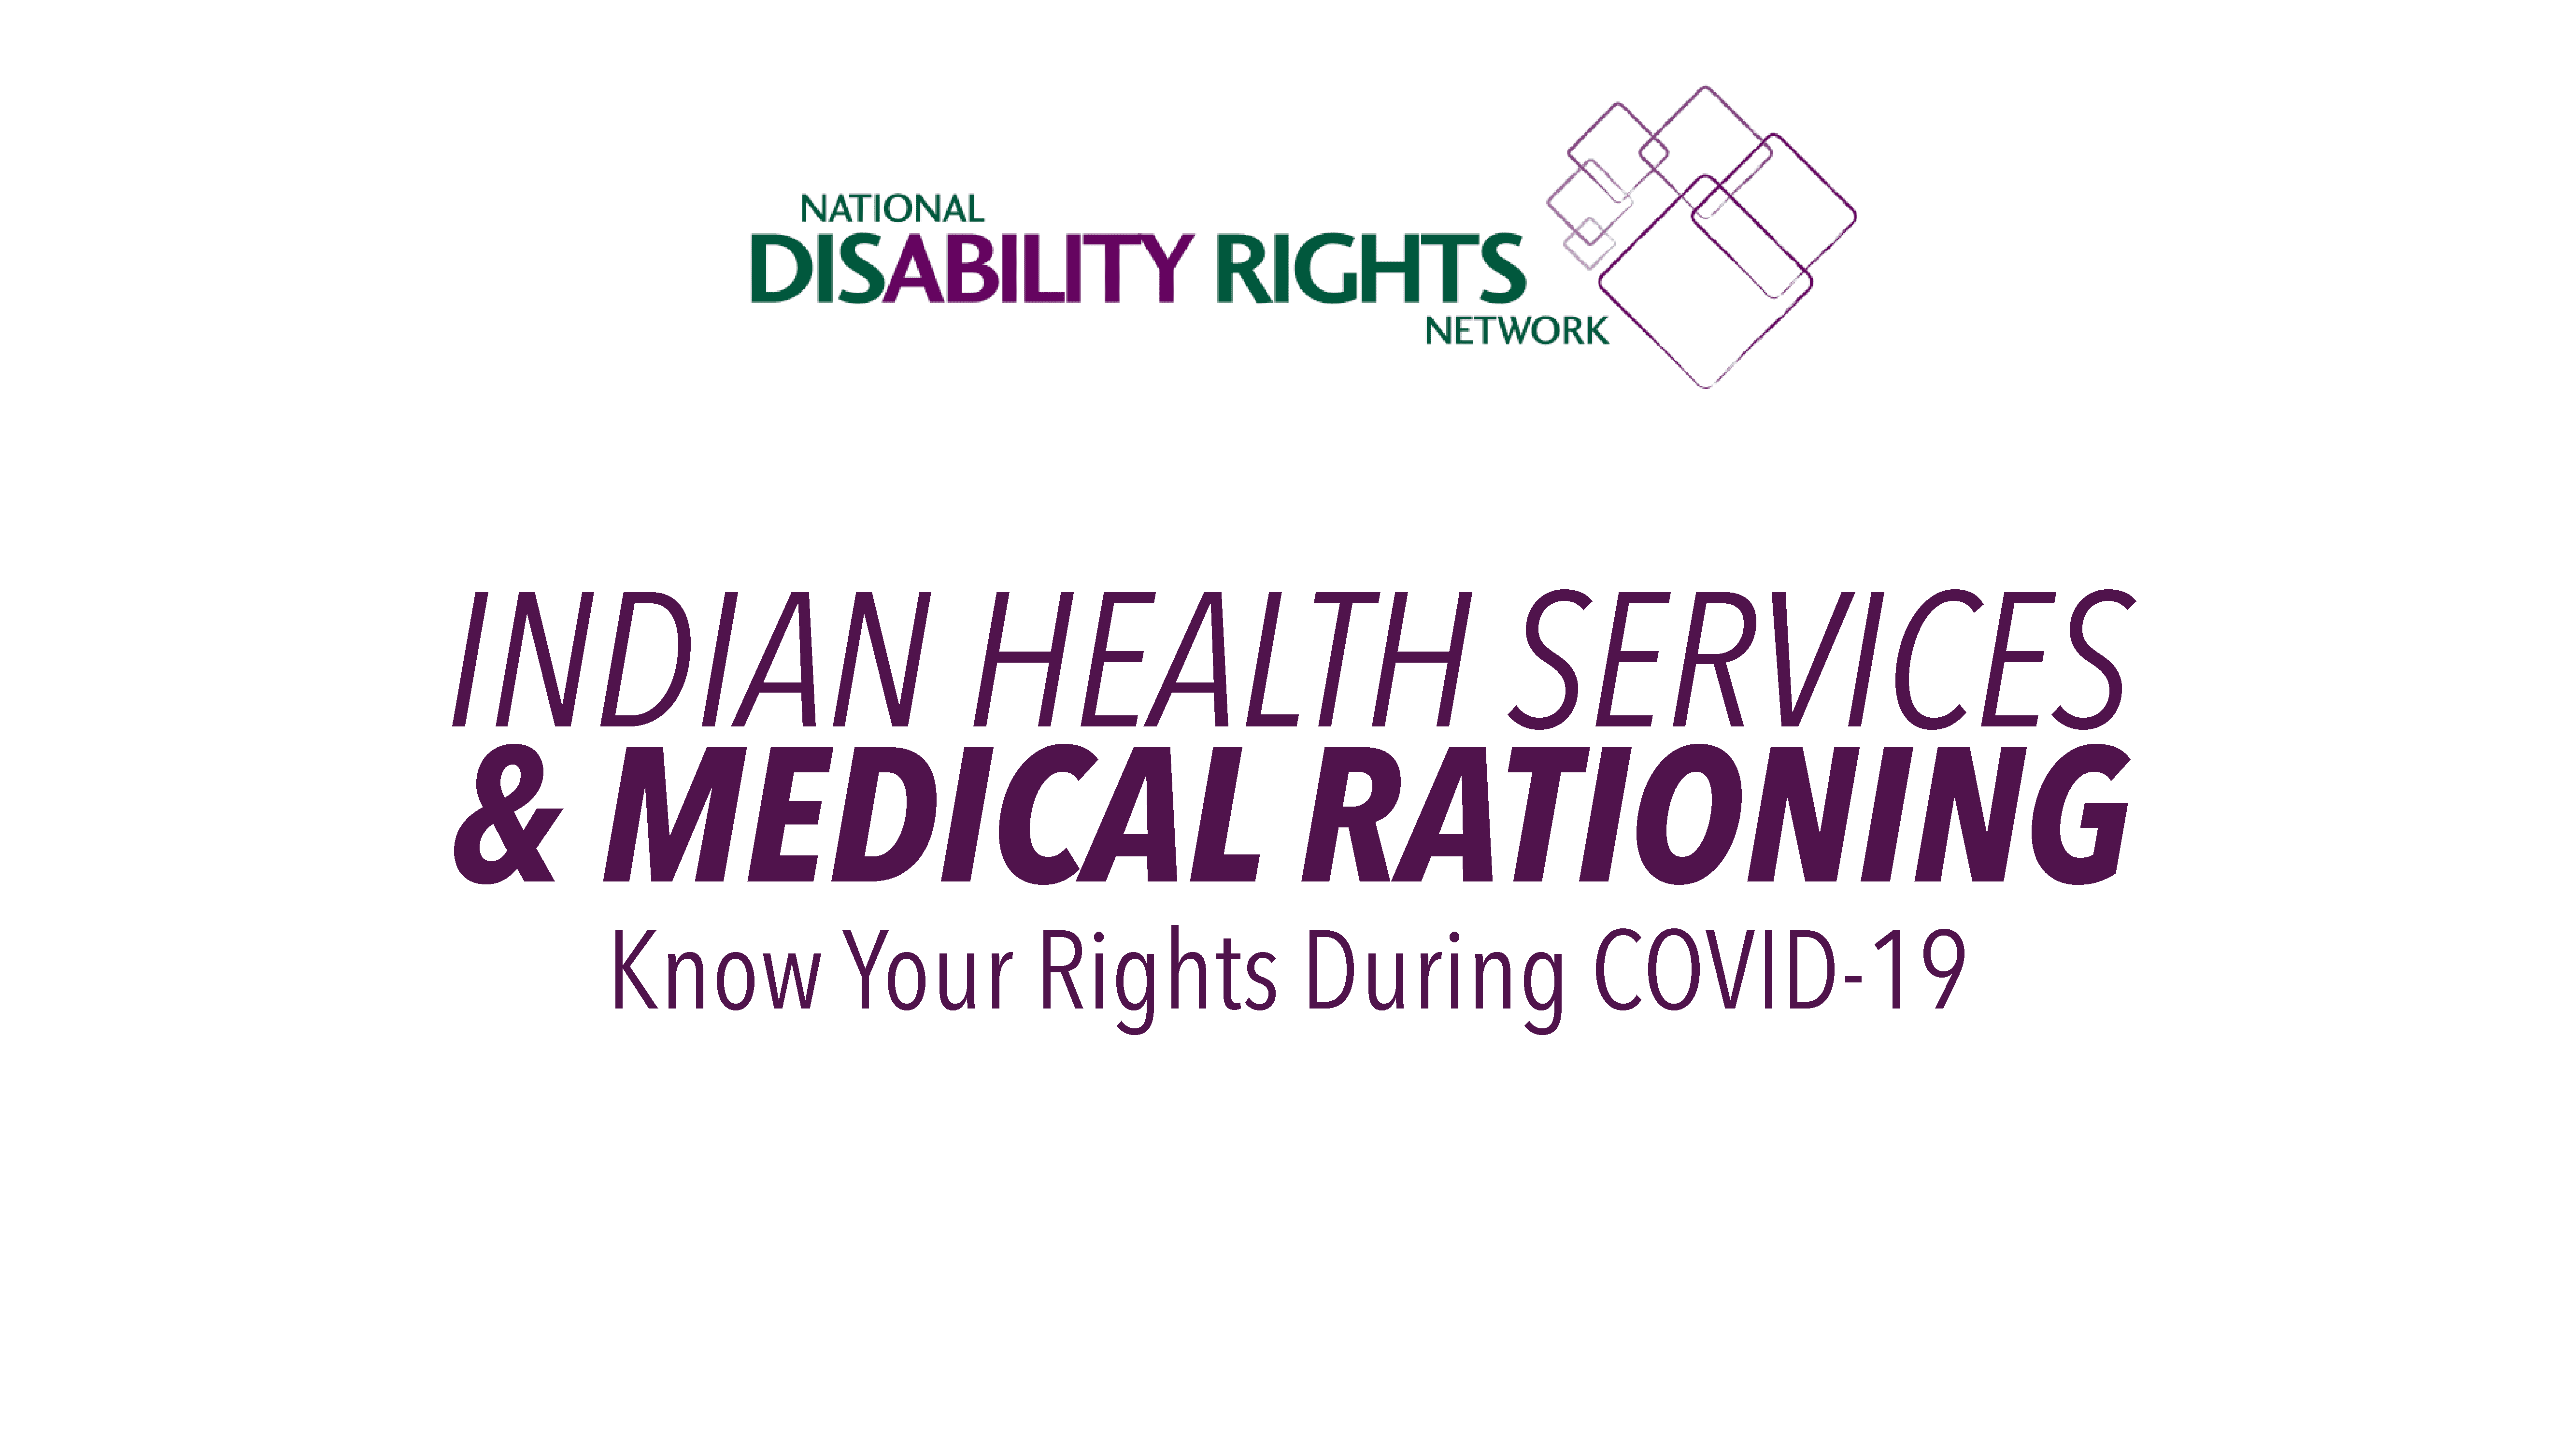 INDIAN HEALTH SERVICES & MEDICAL RATIONING Know Your Rights During COVID-19